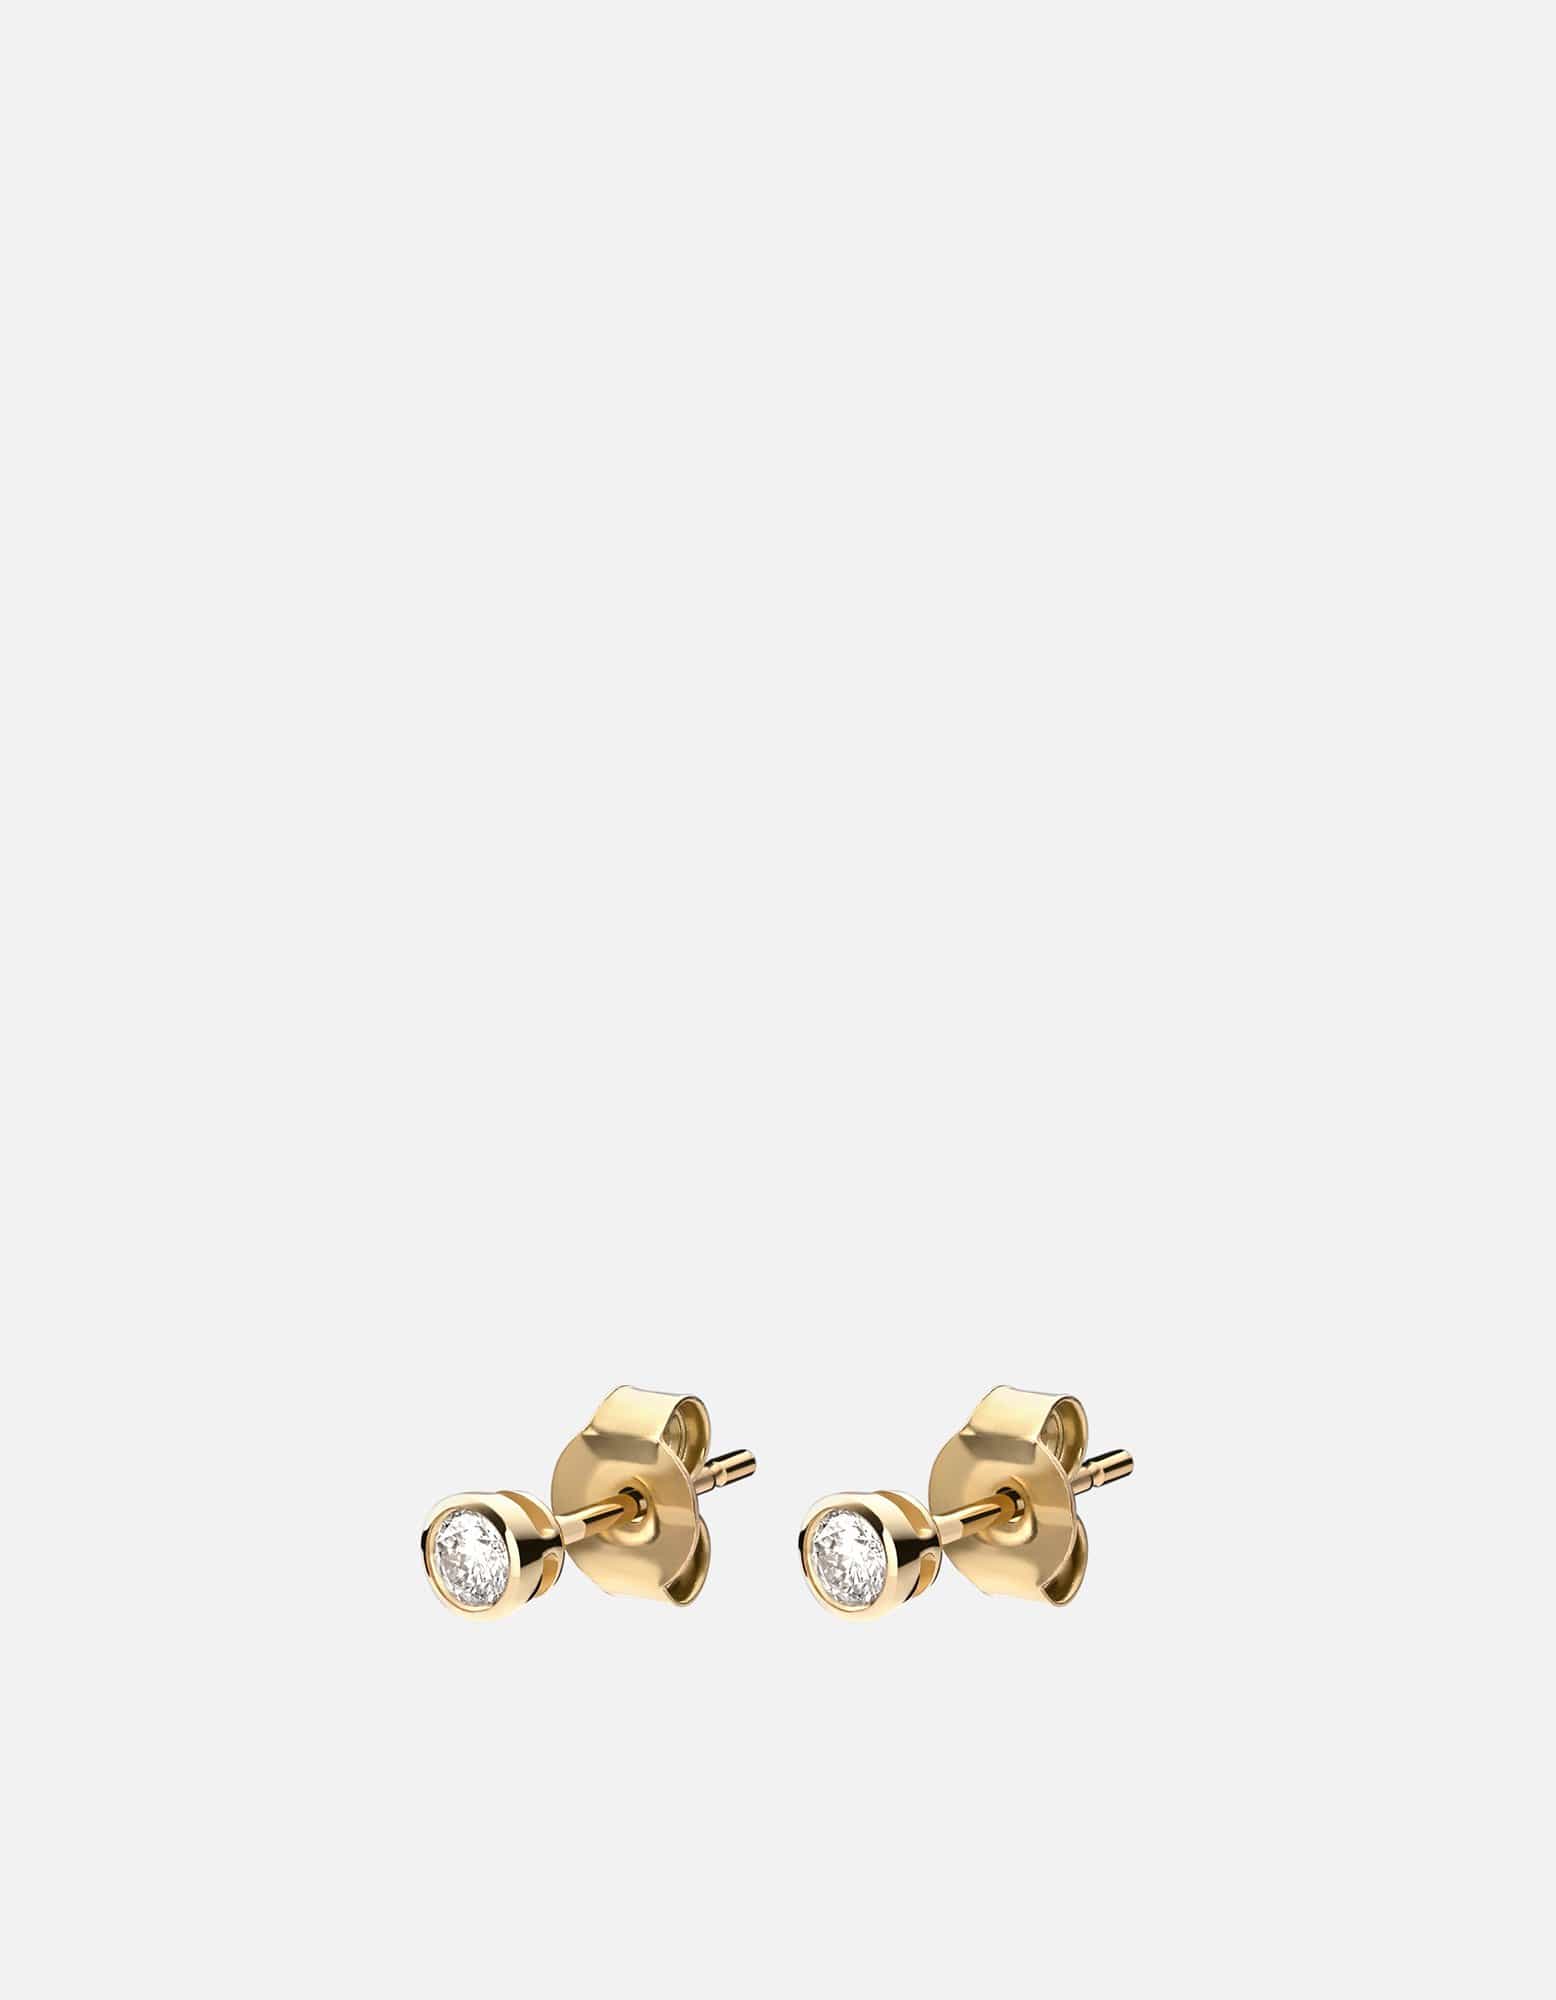 Image of Solitaire Studs, 14k Gold Pavé